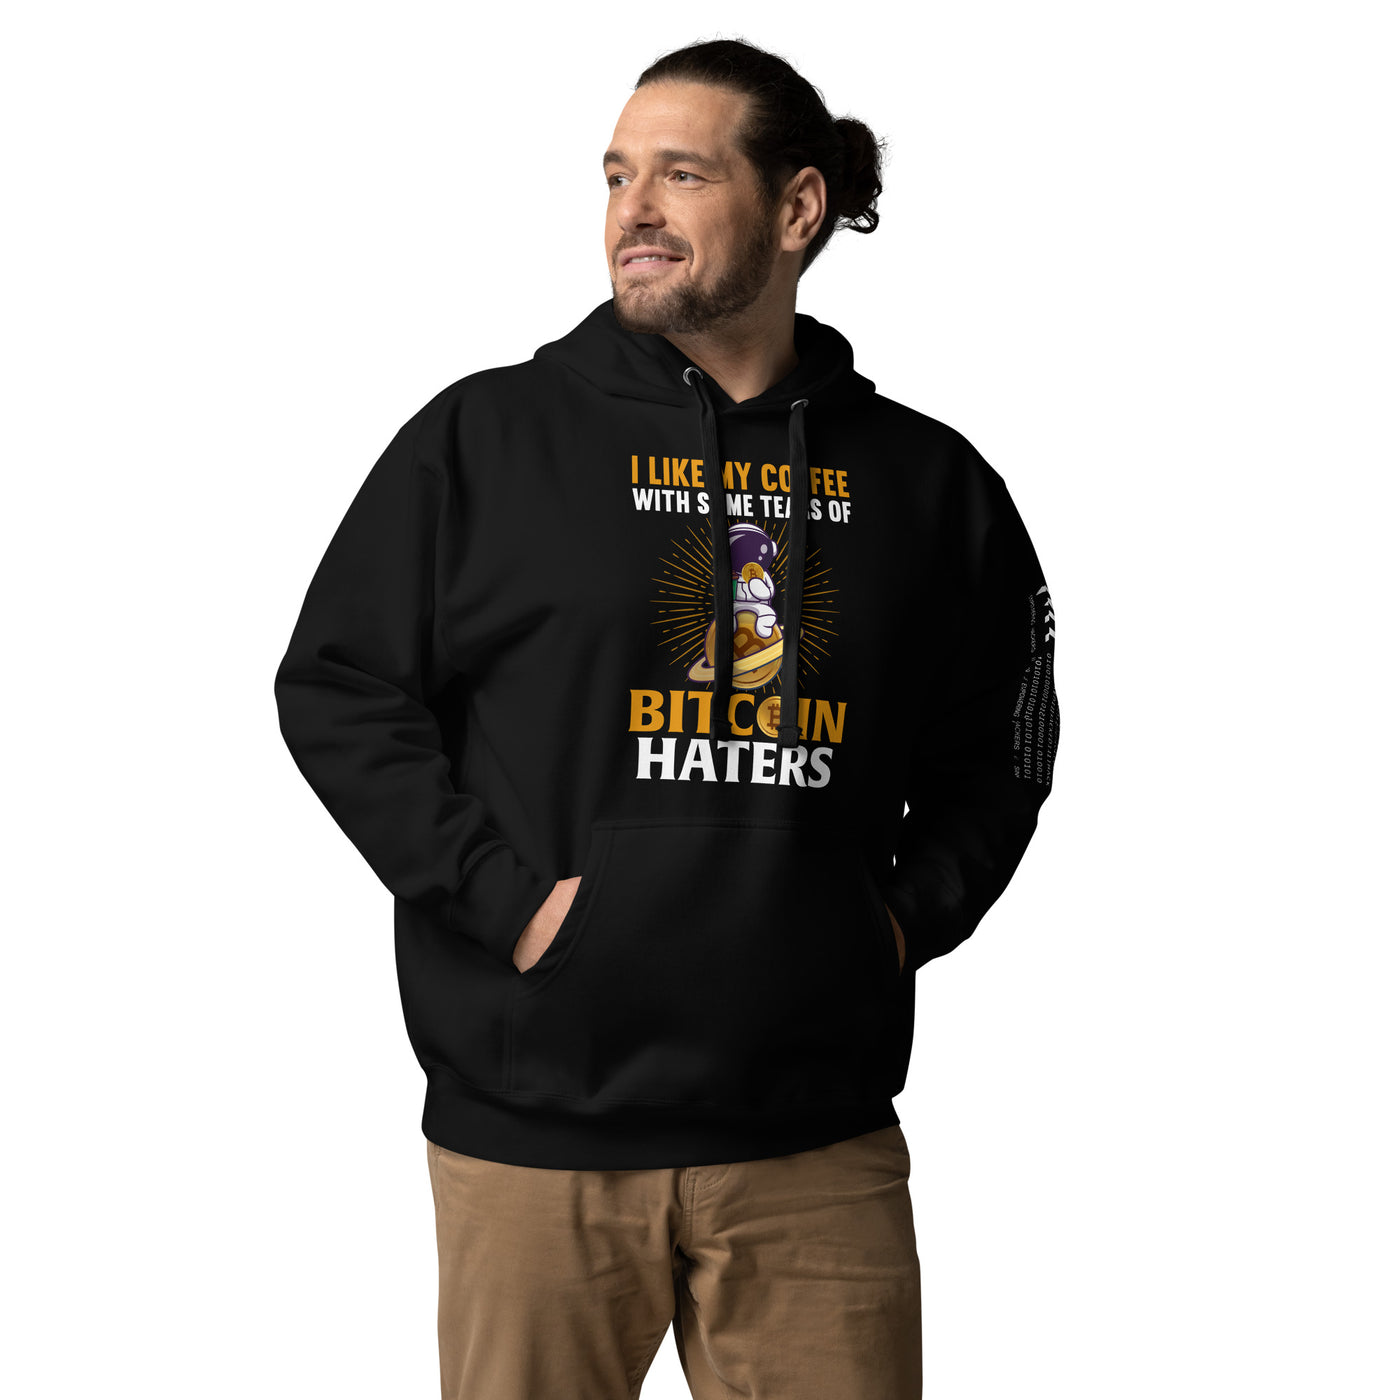 I like my Coffee with some tears of Bitcoin Haters - Unisex Hoodie